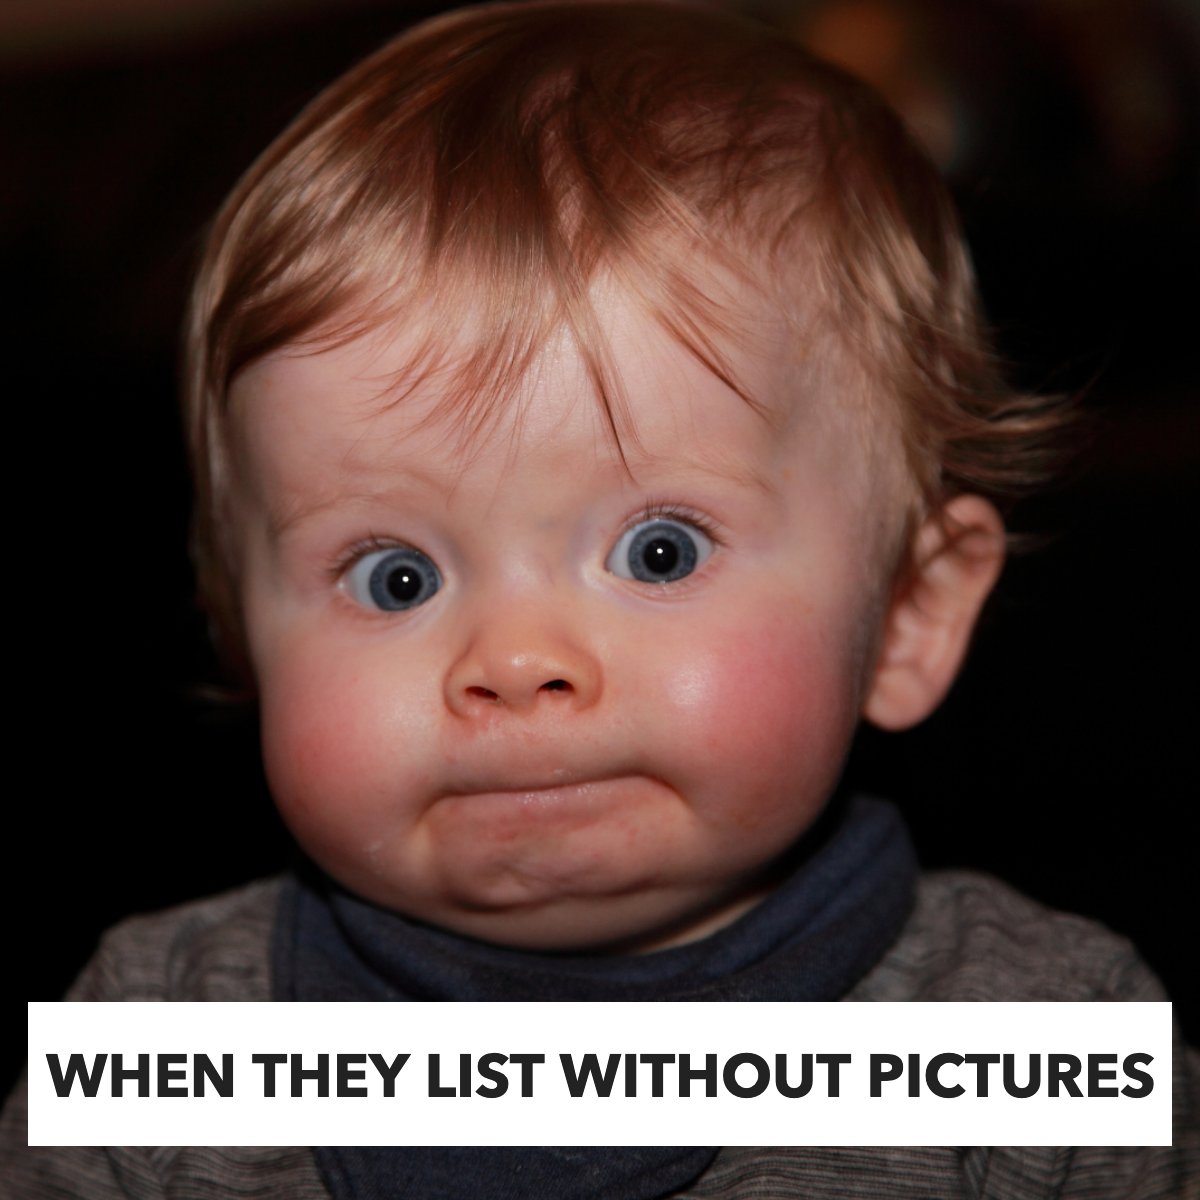 Pics or it's not happening! 🚫 🙅

#awkward #meme #silly #listing #funnyface #baby
 #AmericasMortgageSolutions #christianpenner #onestopbrokershop #mortgagebrokerwestpalmbeach #epicrealeststedeals #TheChristianPennerMortgageTeam #mortgagebrokerflorida #mortgageadvice